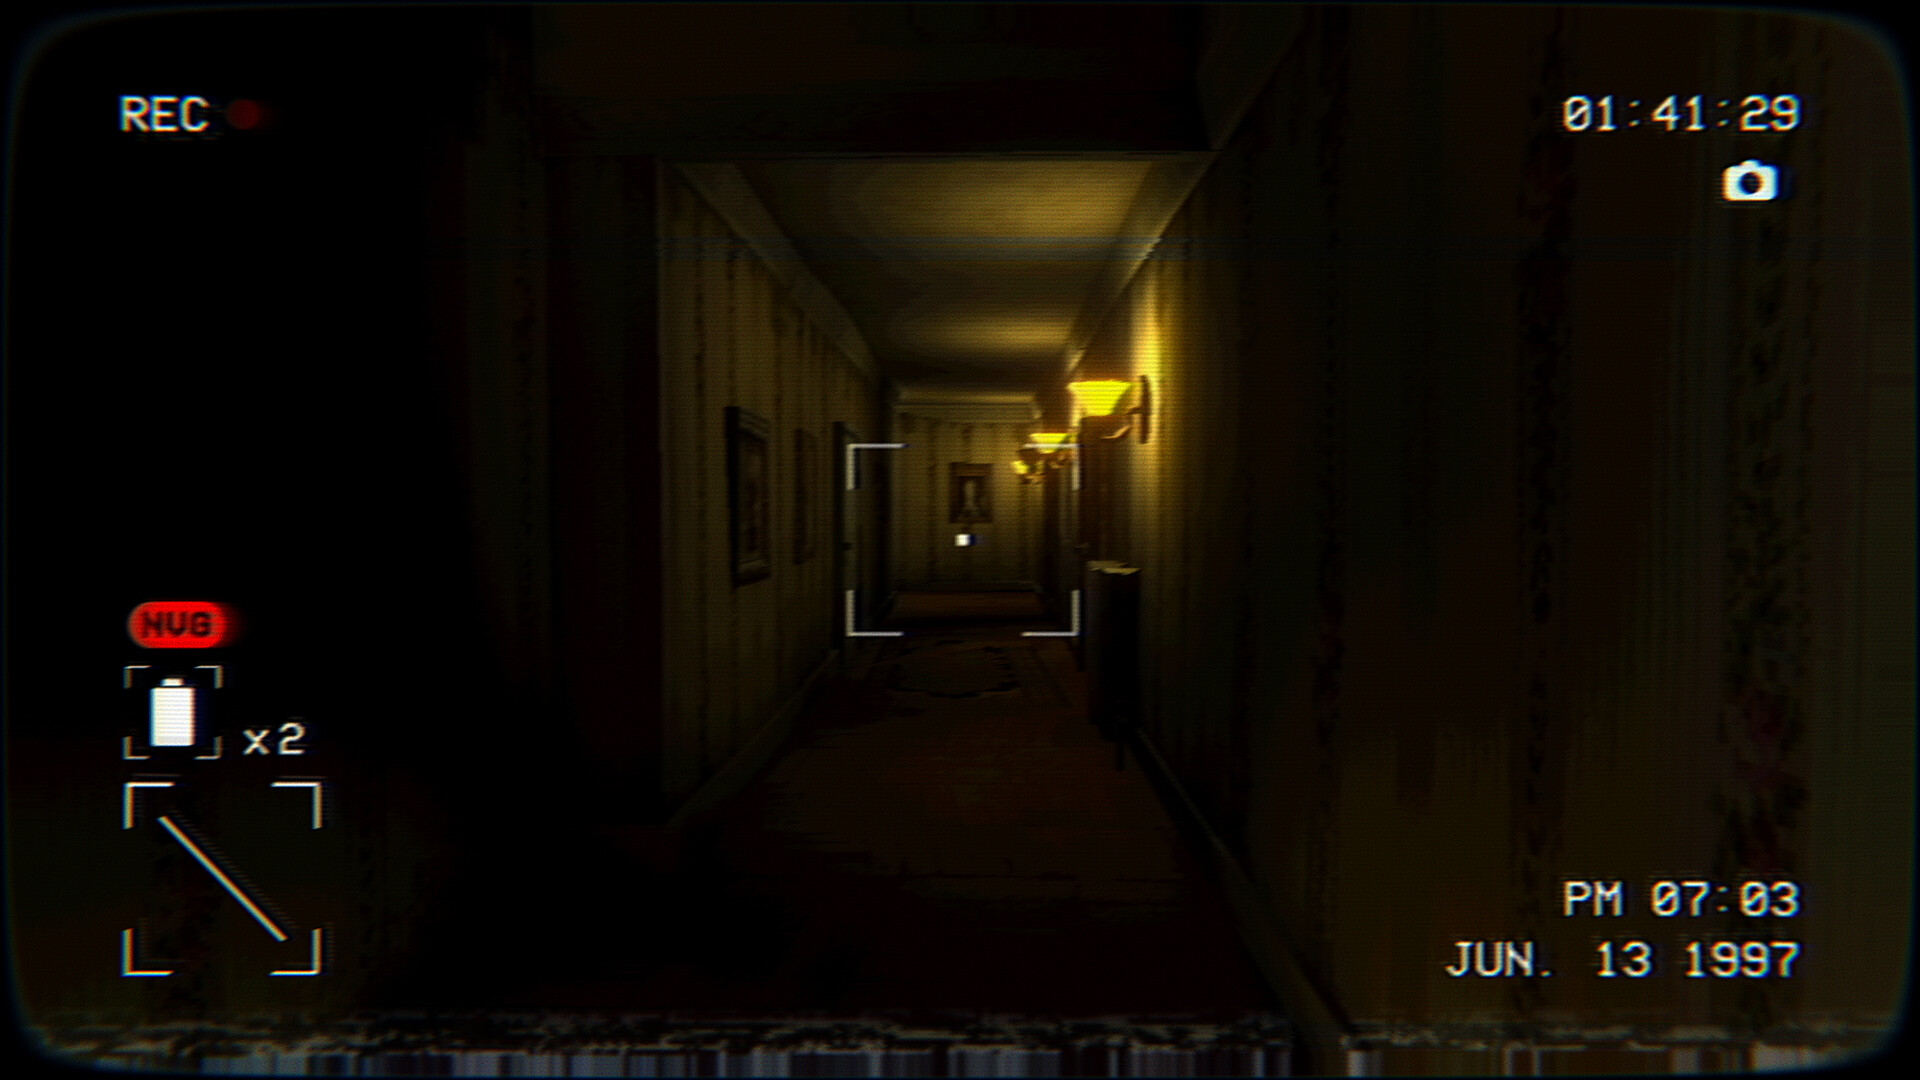 the sinner horror pc game download p.t type game